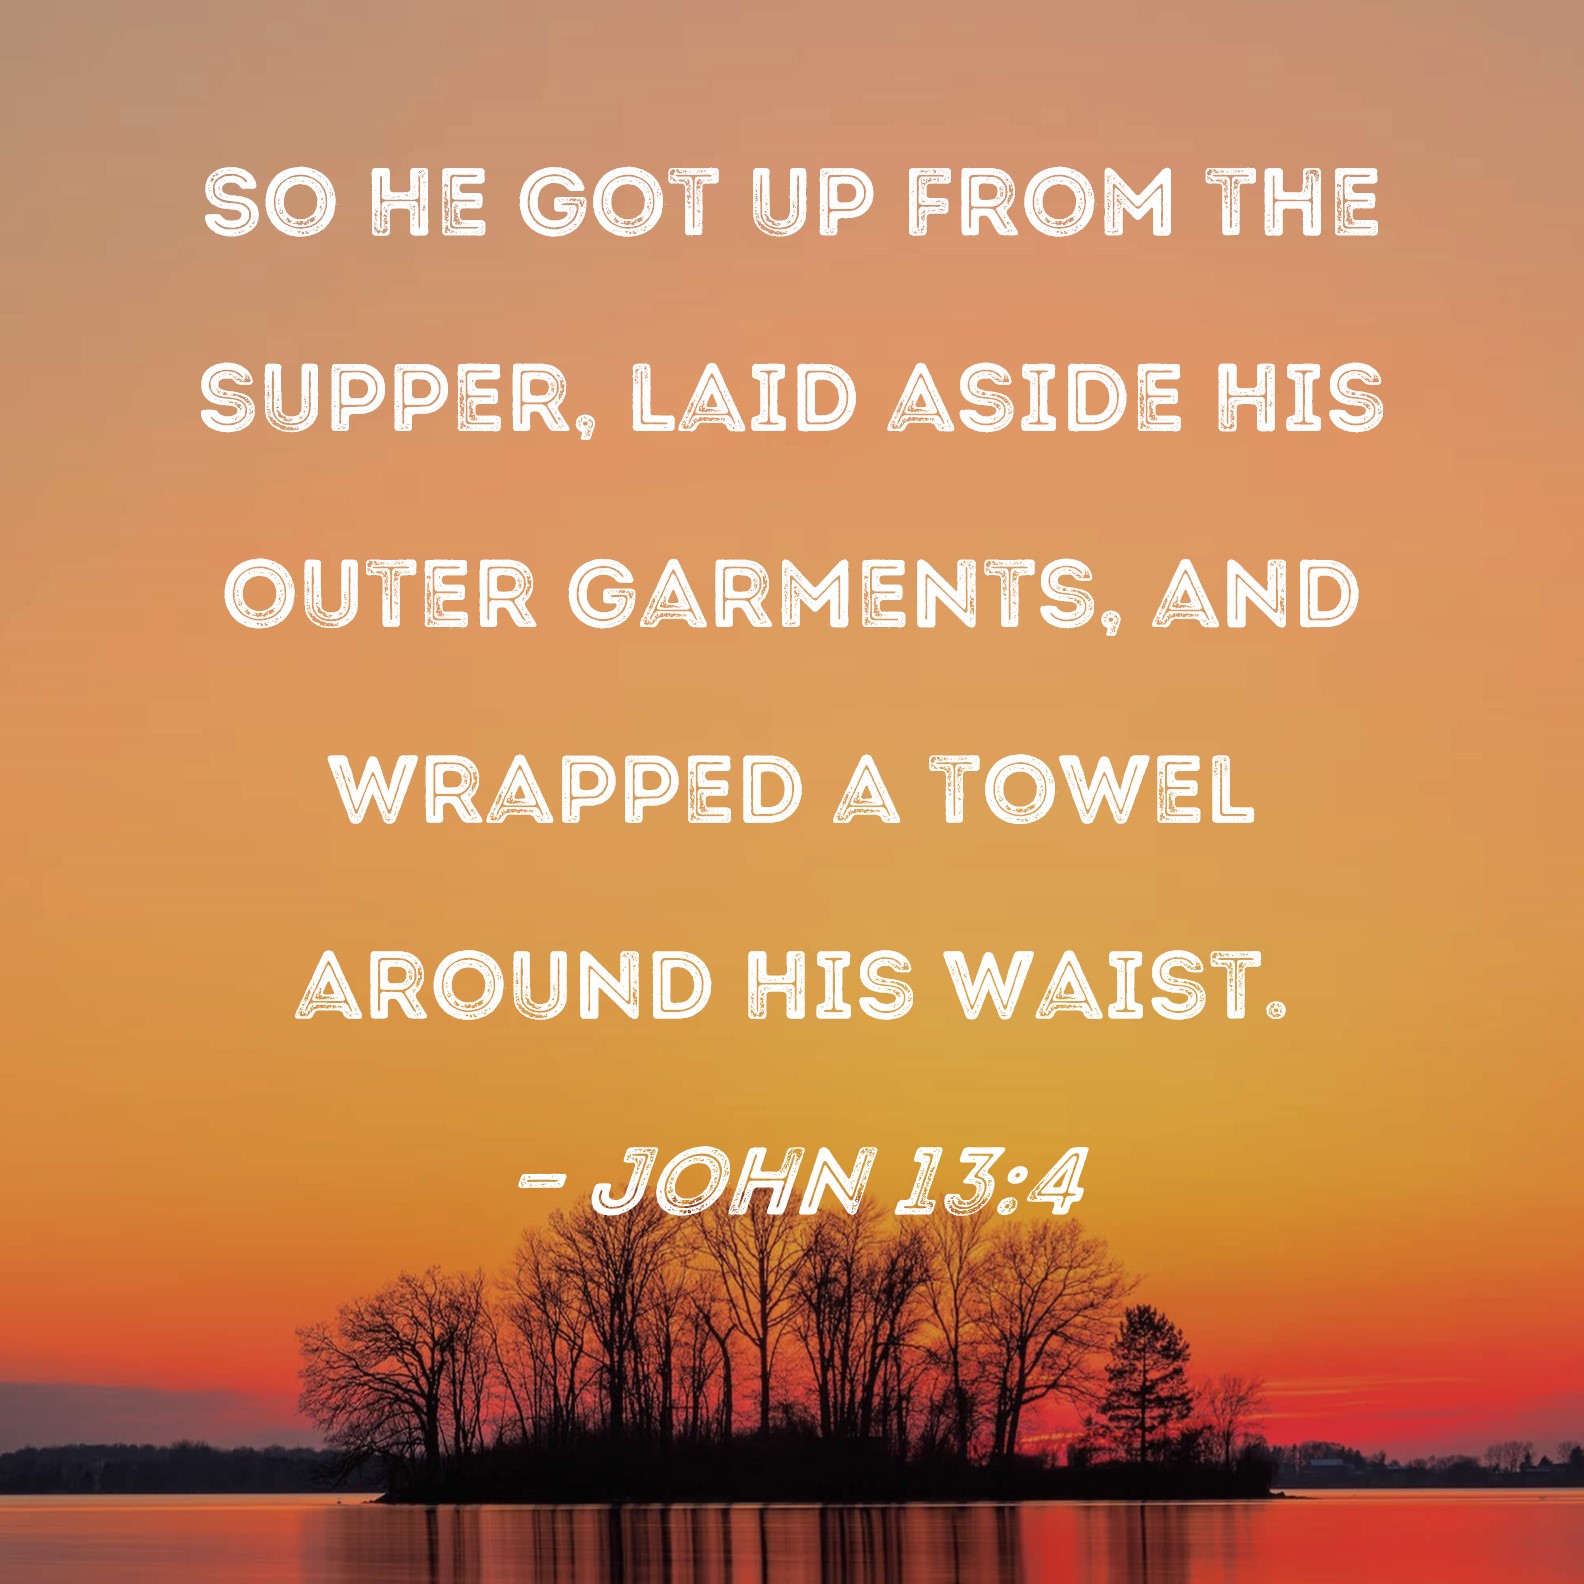 John 13:4 So He got up from the supper, laid aside His outer